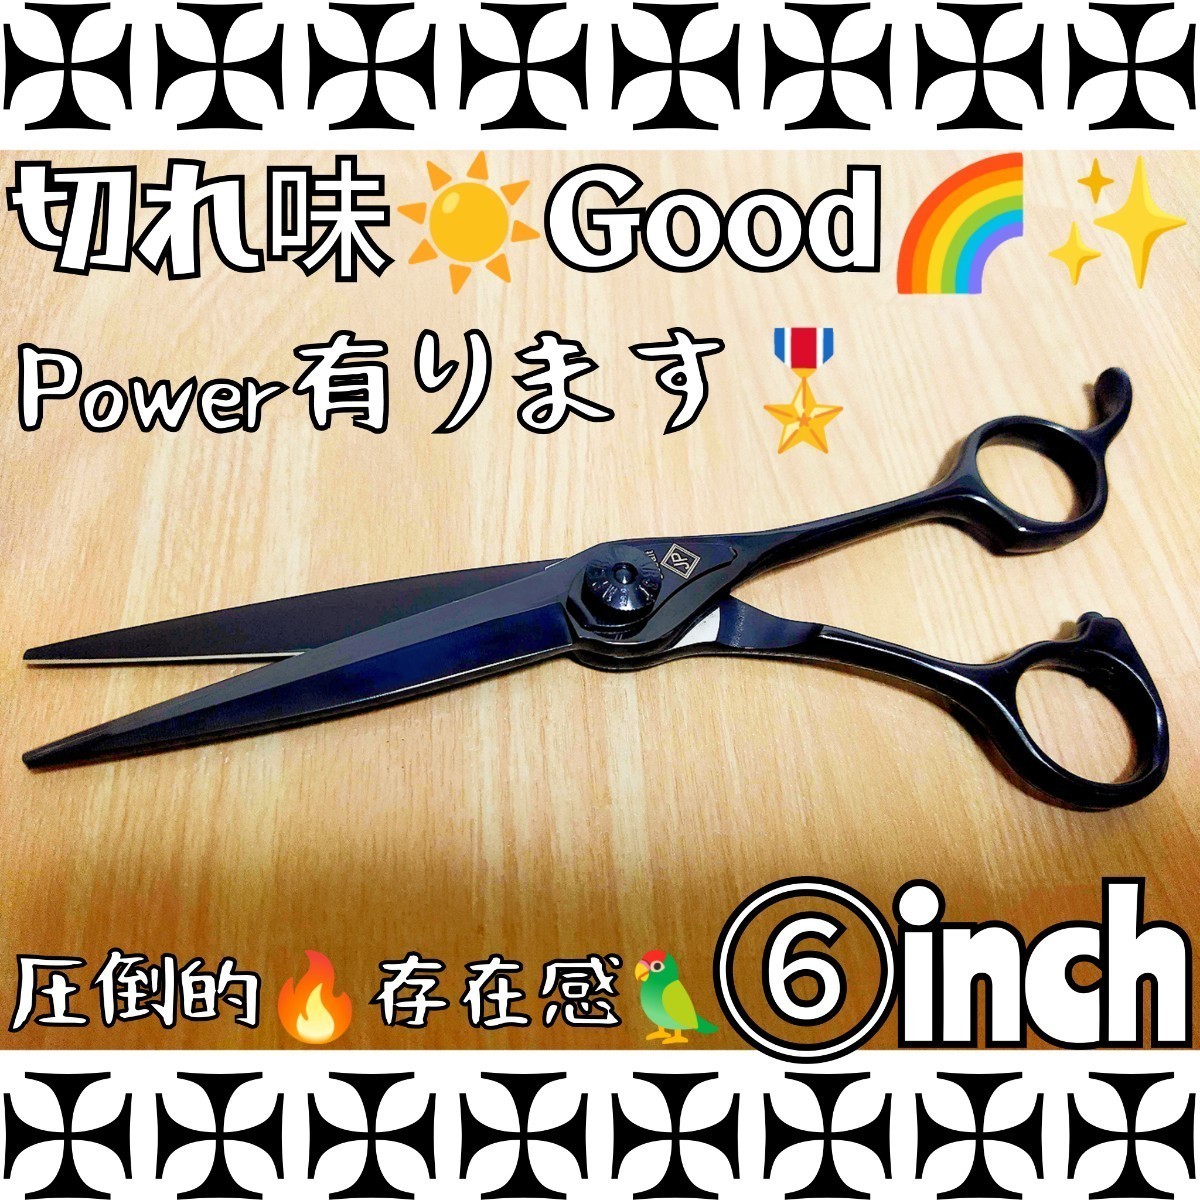 s Pas pa break beauty . professional scissors Naruto si The - same . times attaching tongs Barber . cut basami evolution series * trimmer trimming si The - pet mama ming.OK